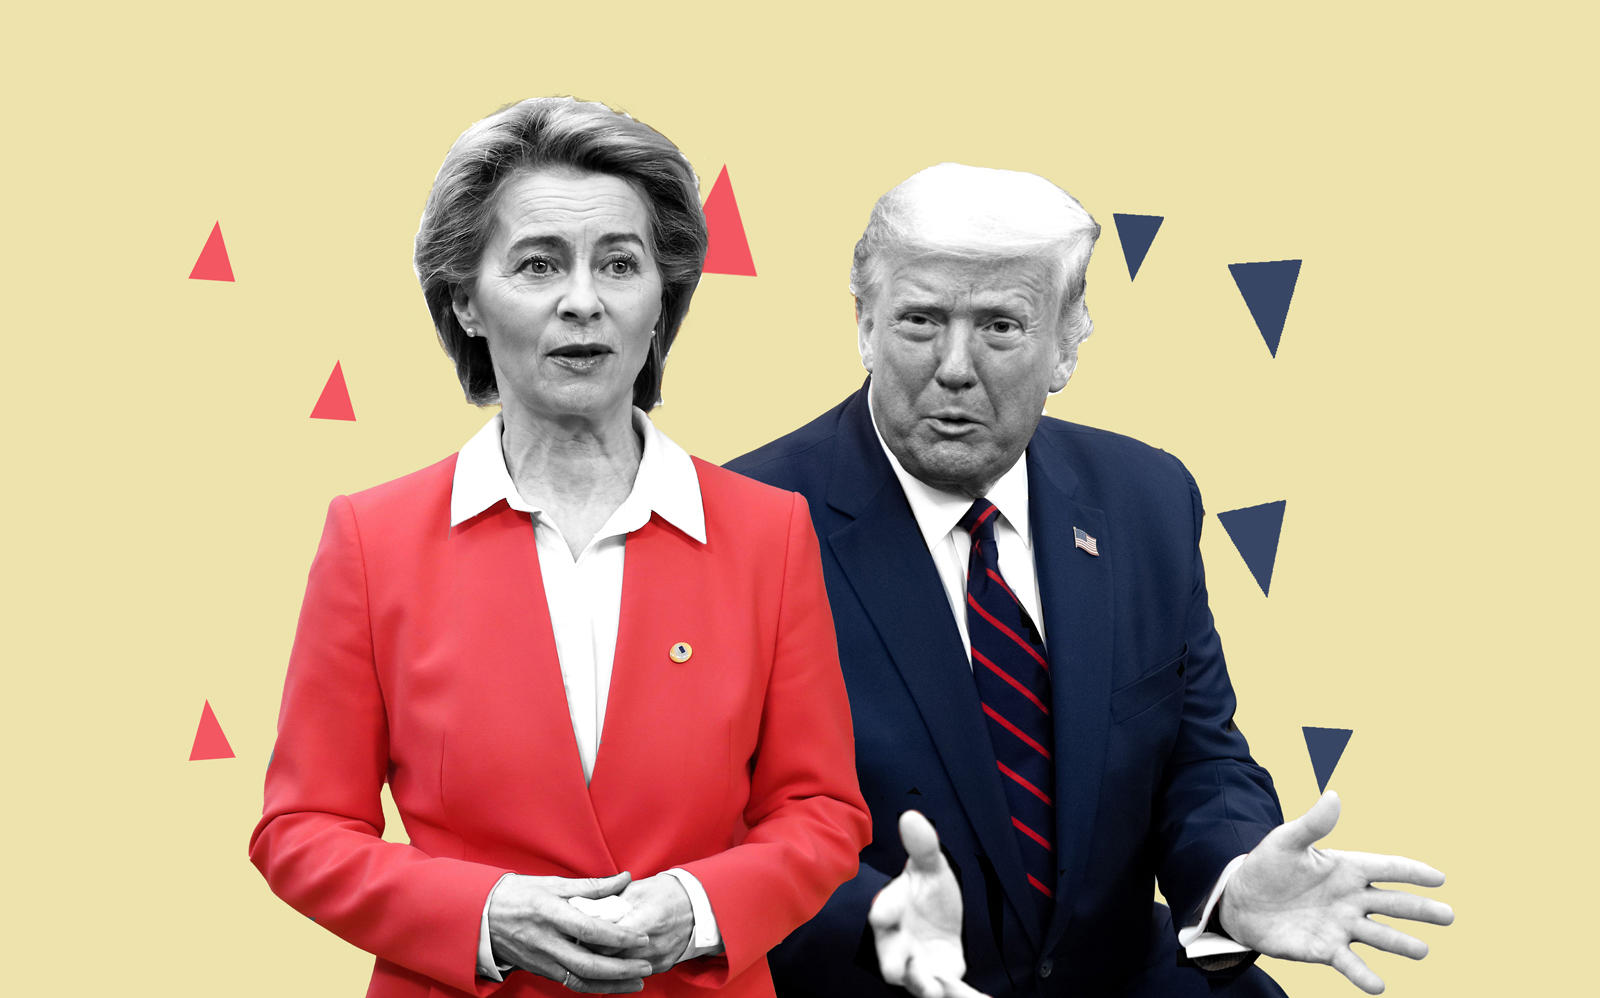 President of the European Commission Ursula von der Leyen and President Donald Trump (Photos by Dursun Aydemir/Anadolu Agency via Getty Images and SAUL LOEB/AFP via Getty Images)